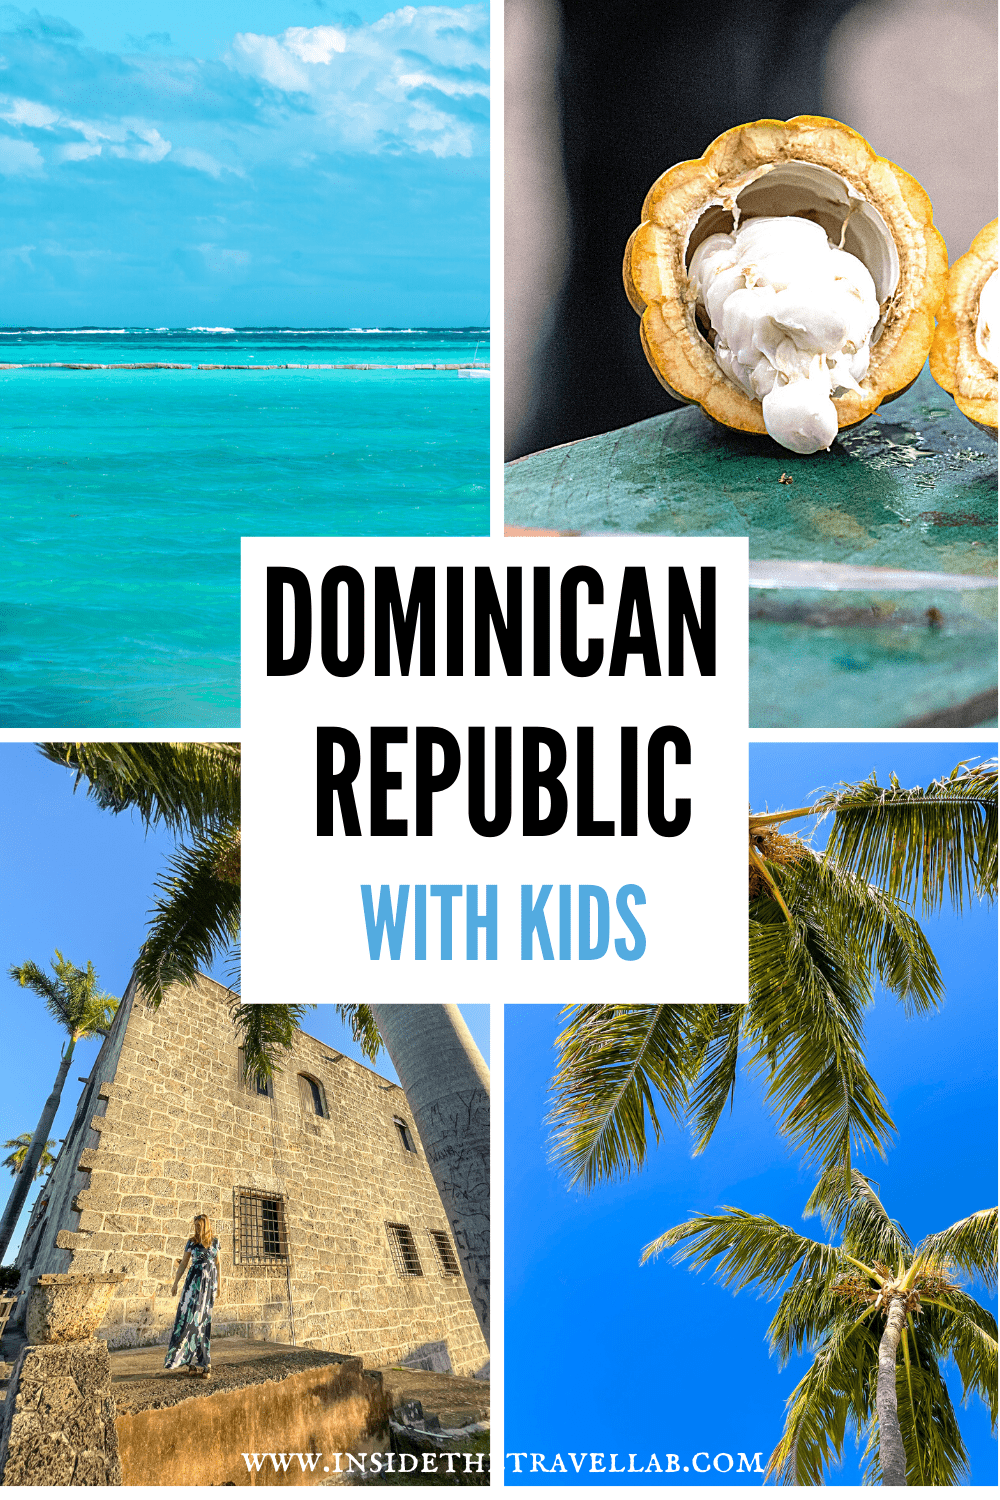 The wonderful sights of the Dominican Republic with kids